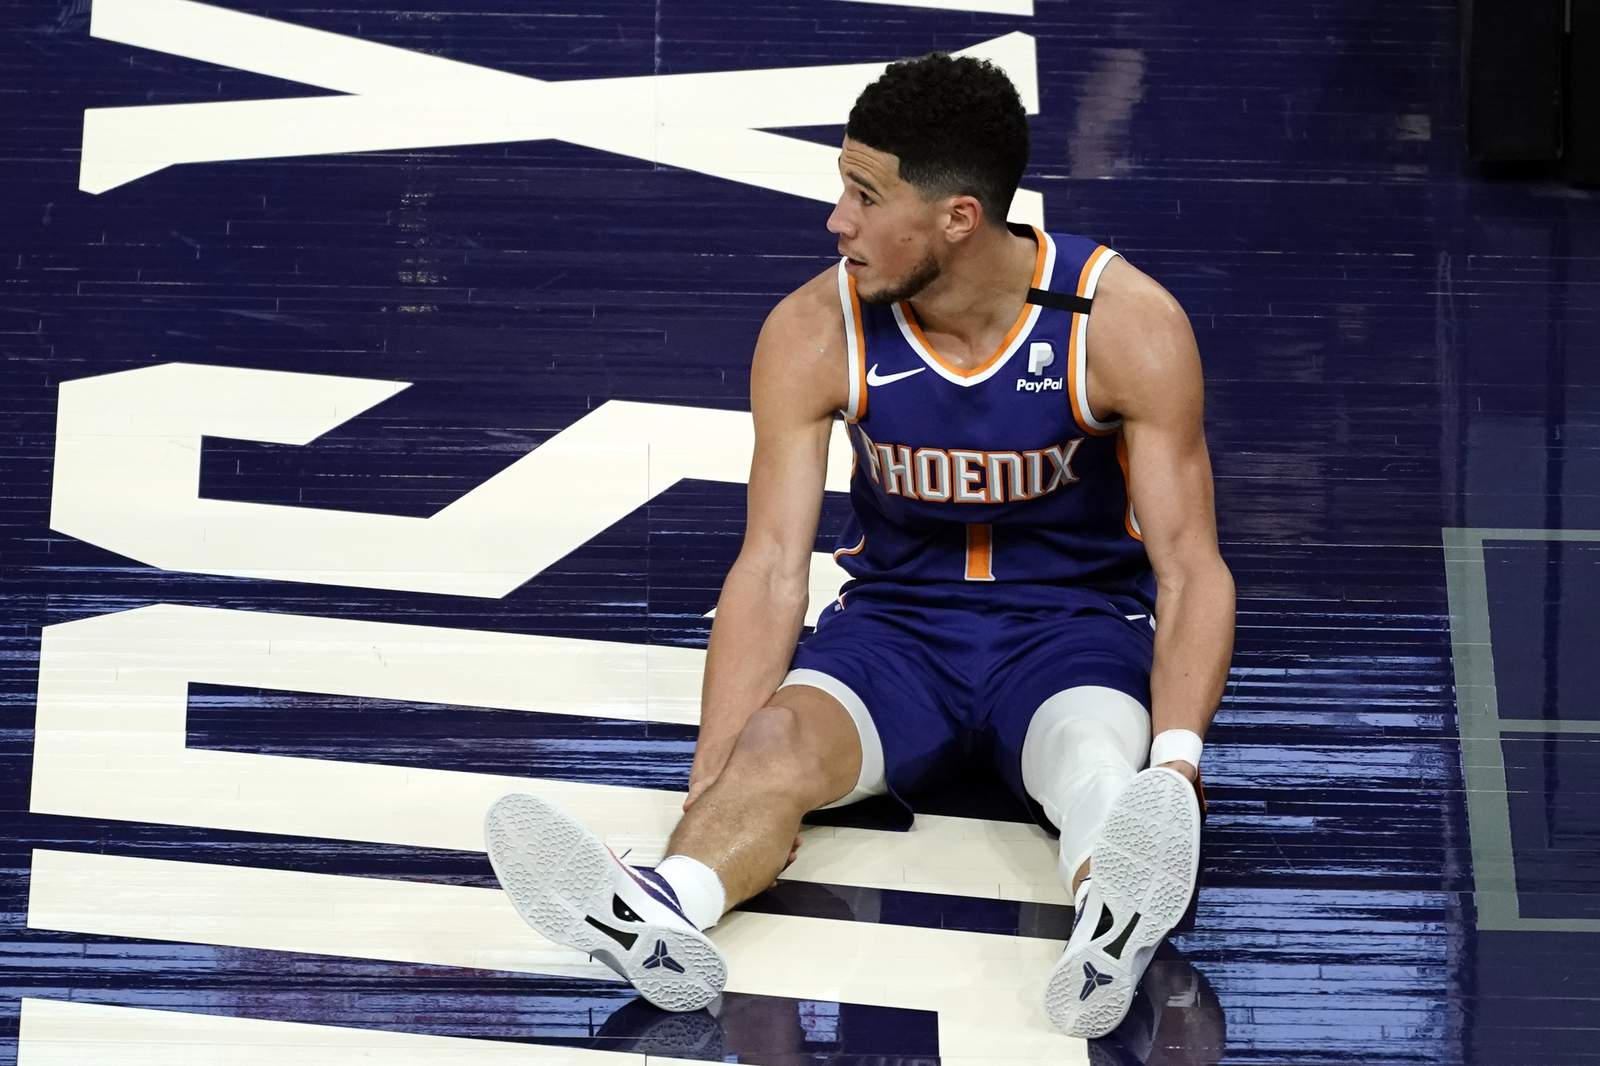 Injured Booker won't play in All-Star Game, Conley replaces